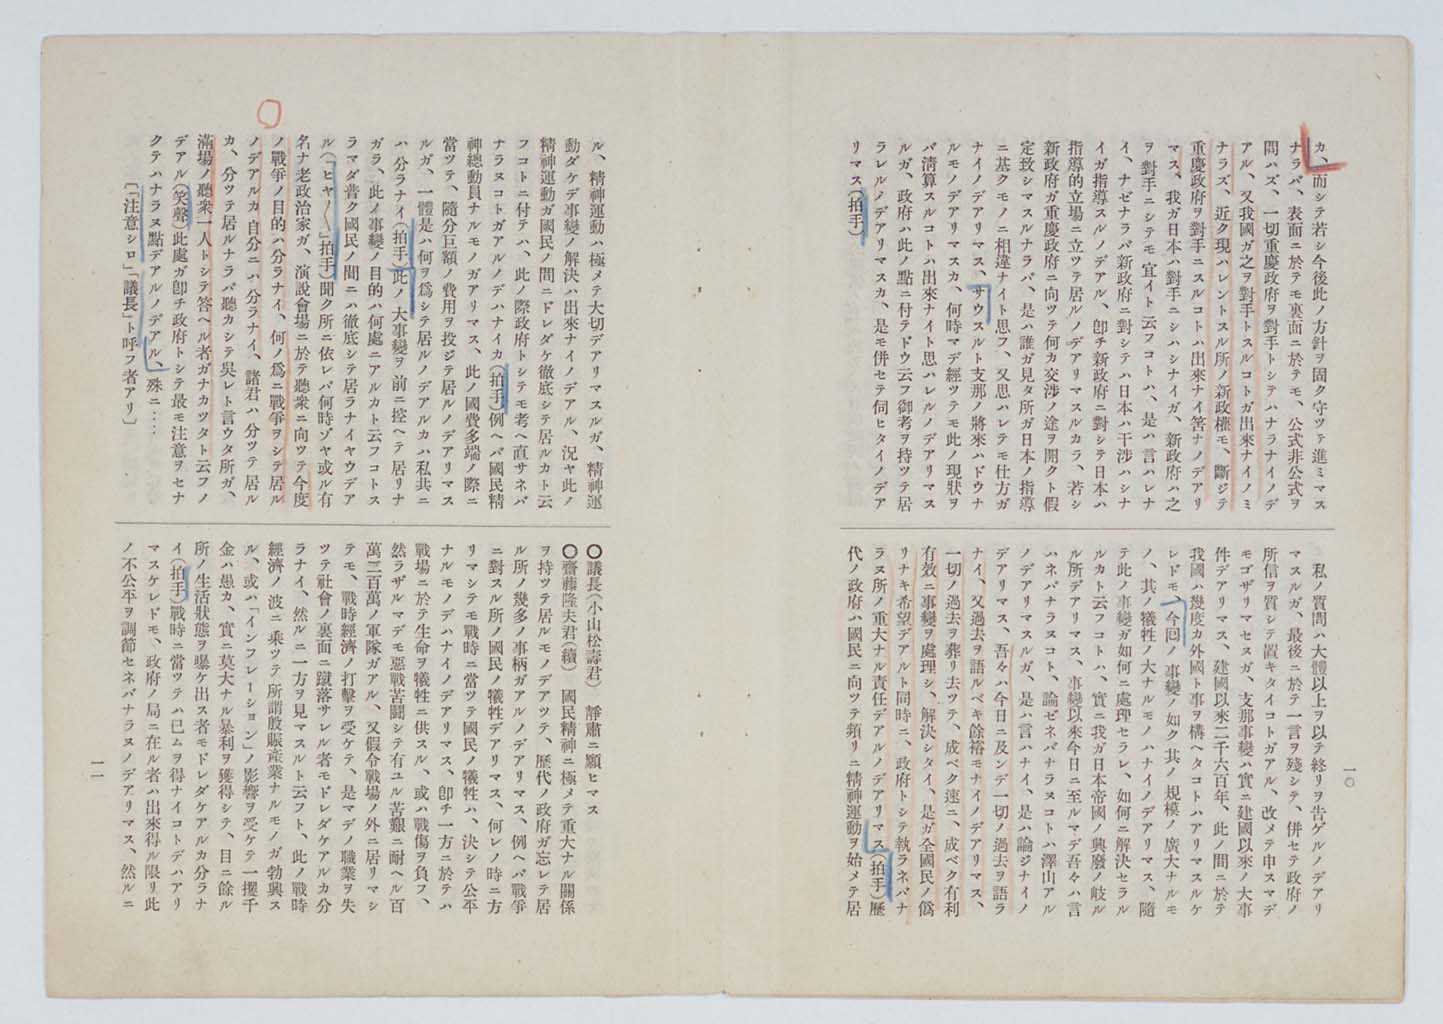 Excised Portion of SAITO Takao's Speech(larger)